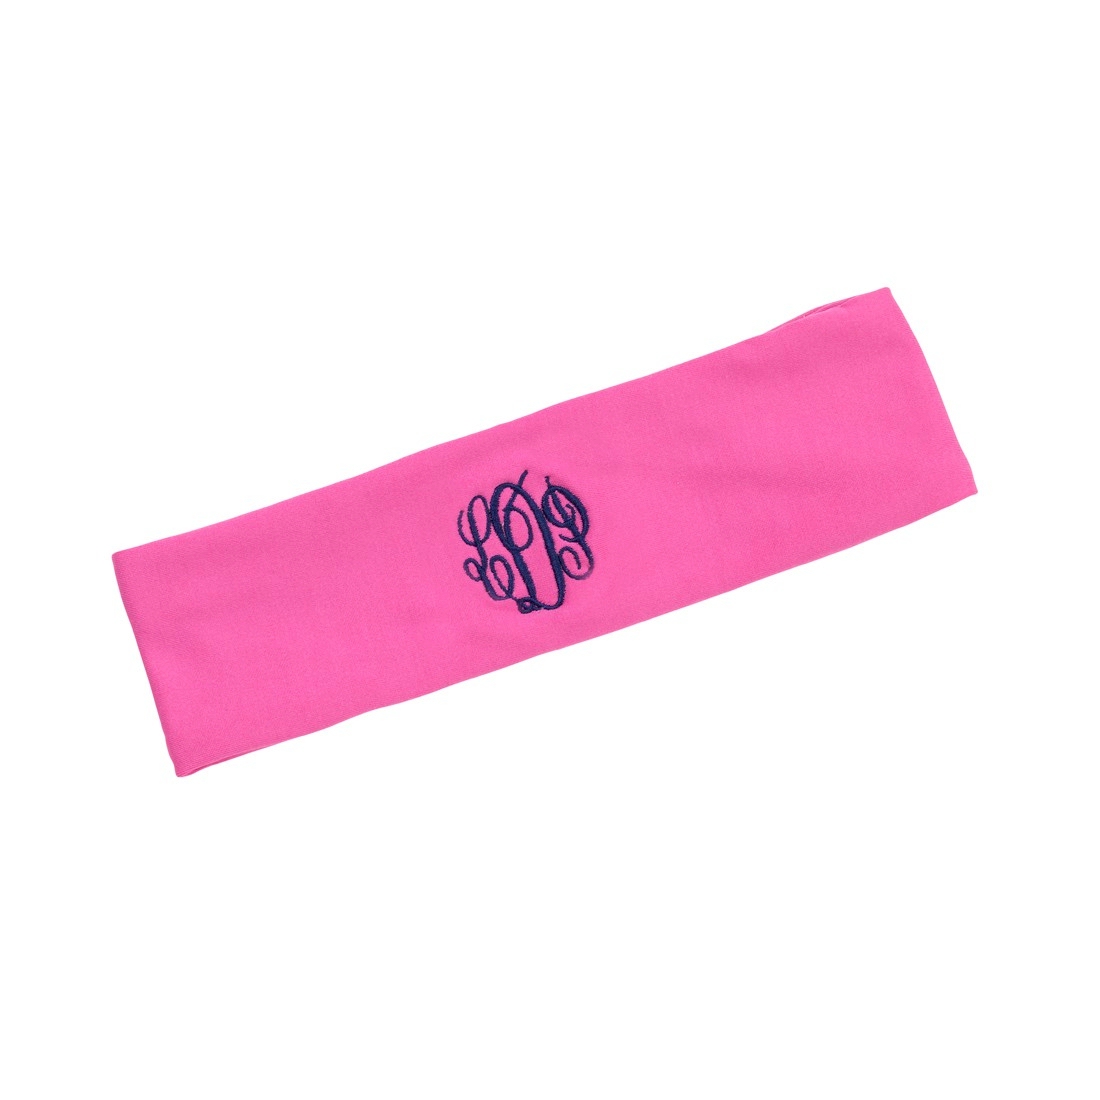 Active Headband in Hot Pink - CLOSEOUT